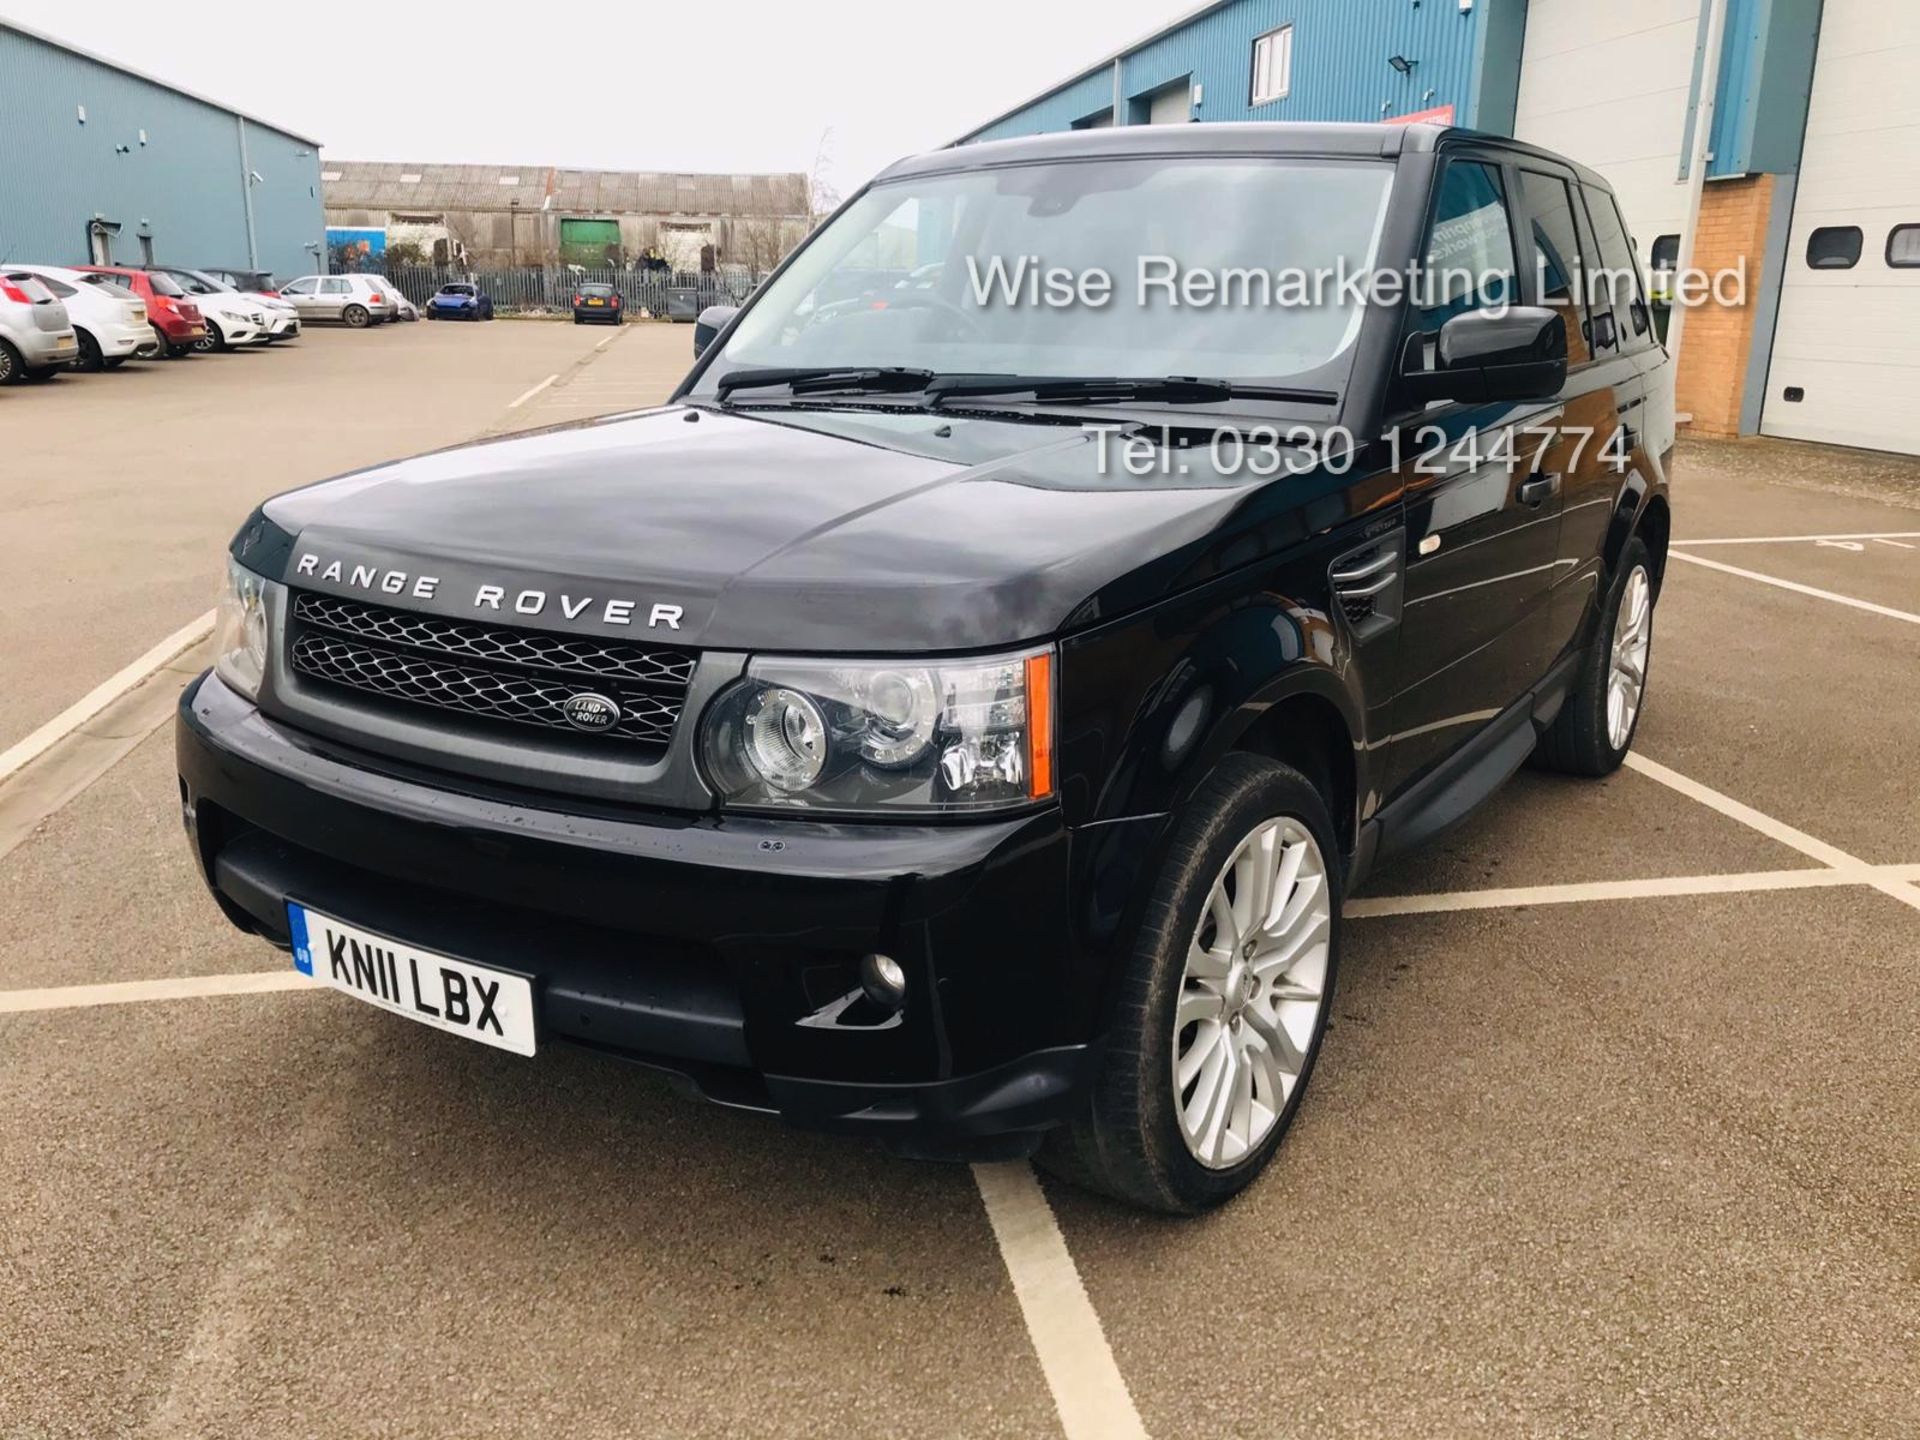 Range Rover Sport SE 3.0 TDV6 Automatic - 2011 11 Reg - 1 Keeper From New - Service History - Image 3 of 21